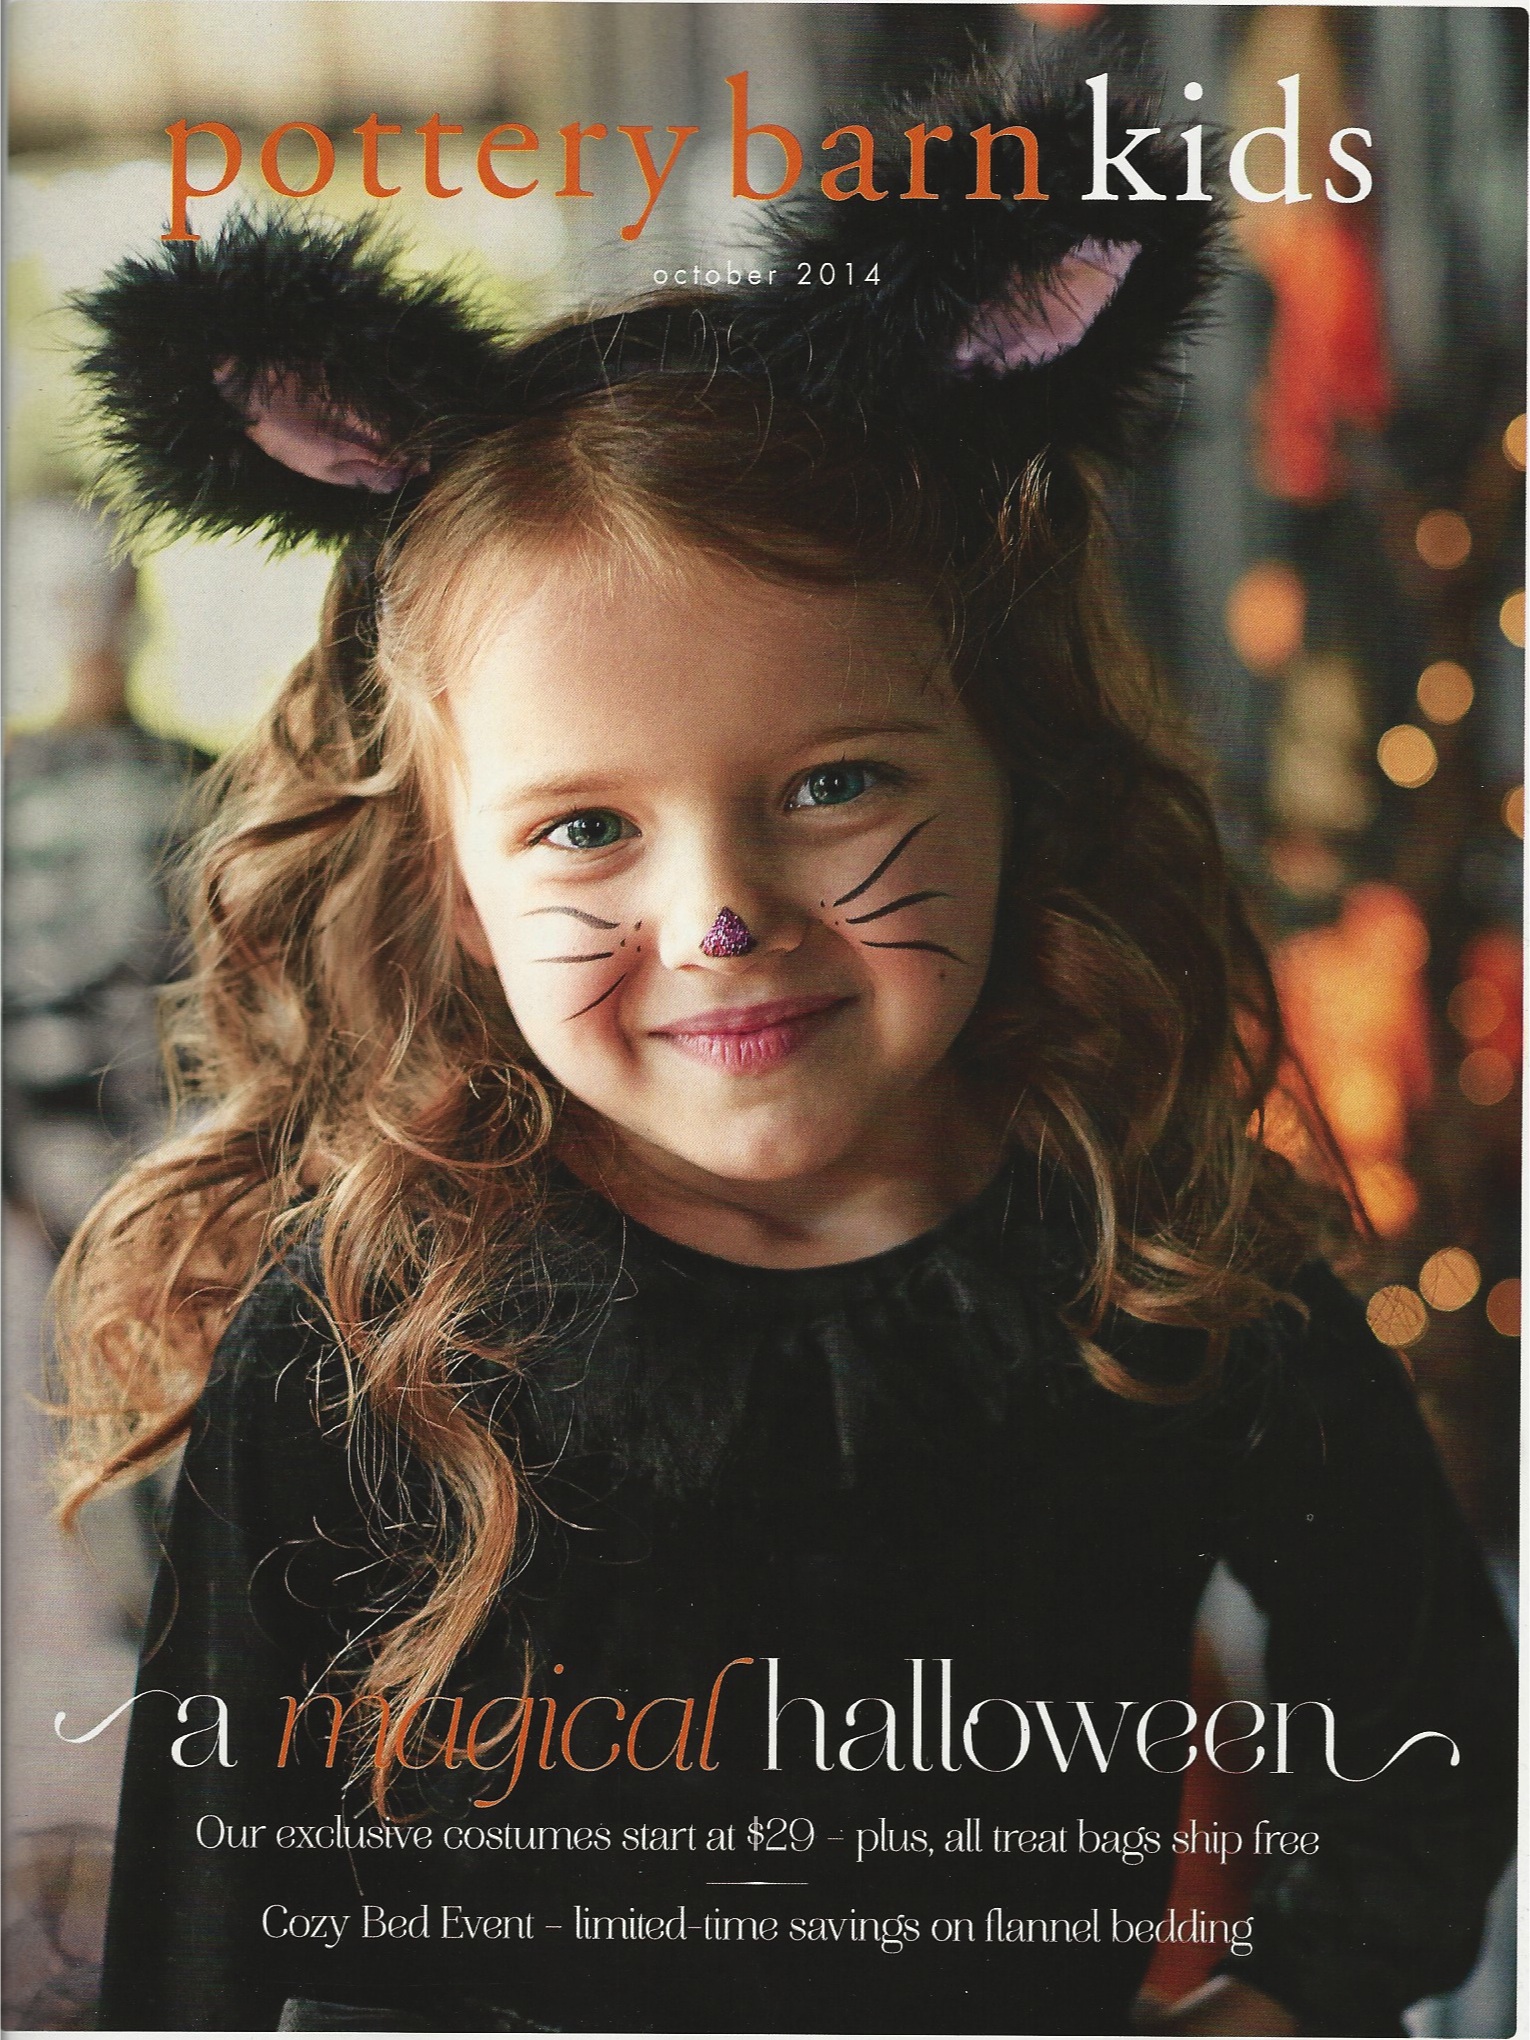 Maddy on the cover for Pottery Barn Kids October 2014 issue.